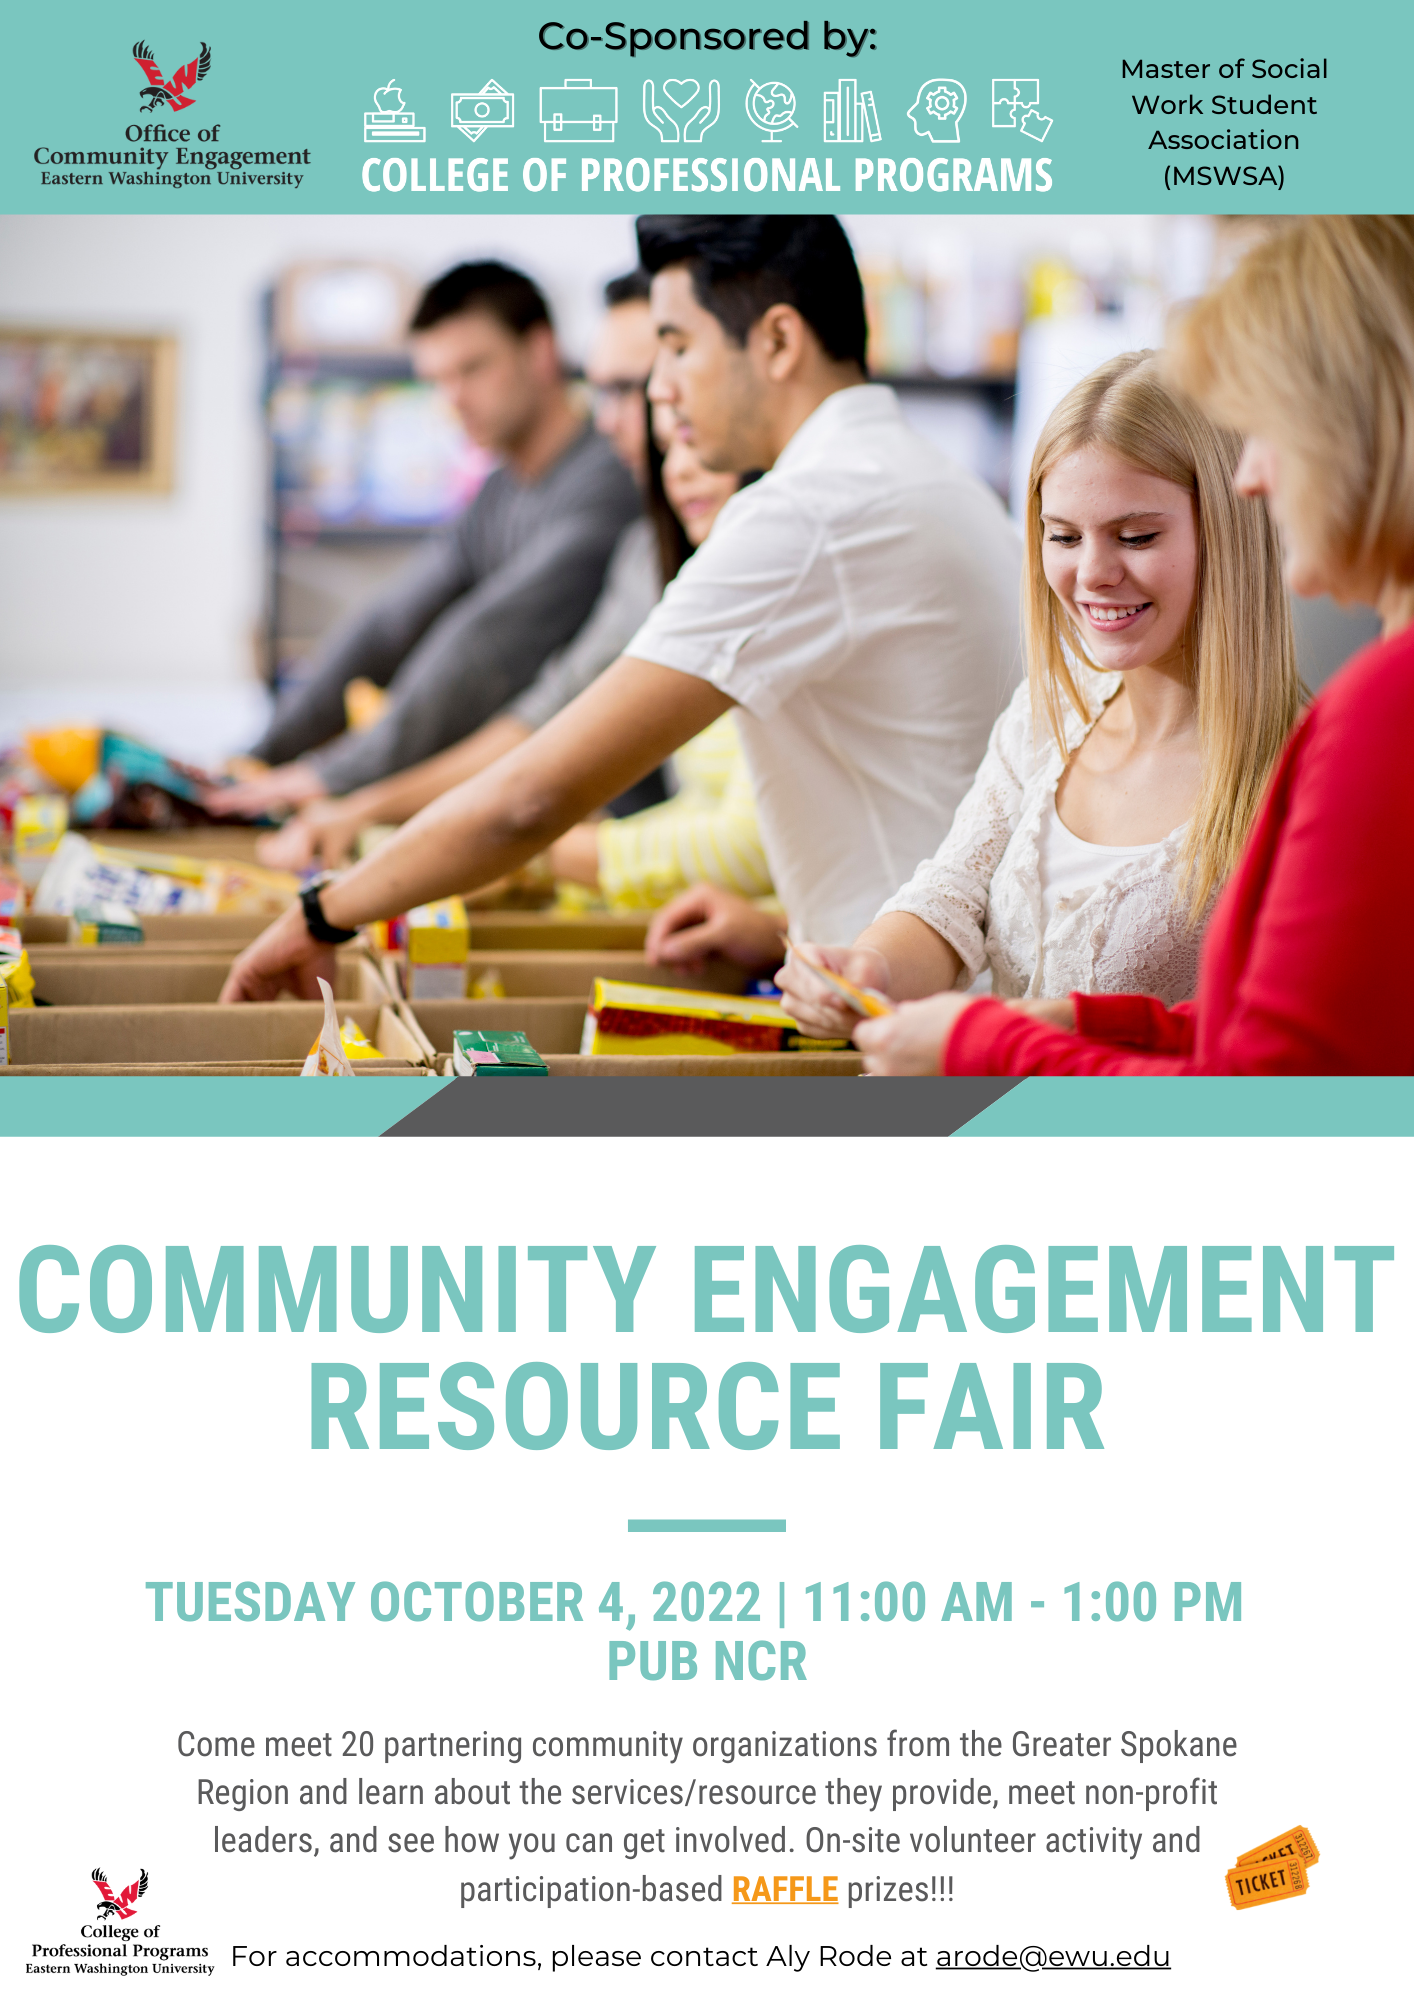 A community engagement fair is occuring on Tuesday October 4th from 11:00 am to 1:00 pm in the PUB NCR (Cheney campus). Co-sponsored by the College of Professional Programs, the Office of Community Engagement, and the Master of Social Work Student Association, this is a great opportunity for students to learn from area service providers about what they do and how students can help by volunteering their time.